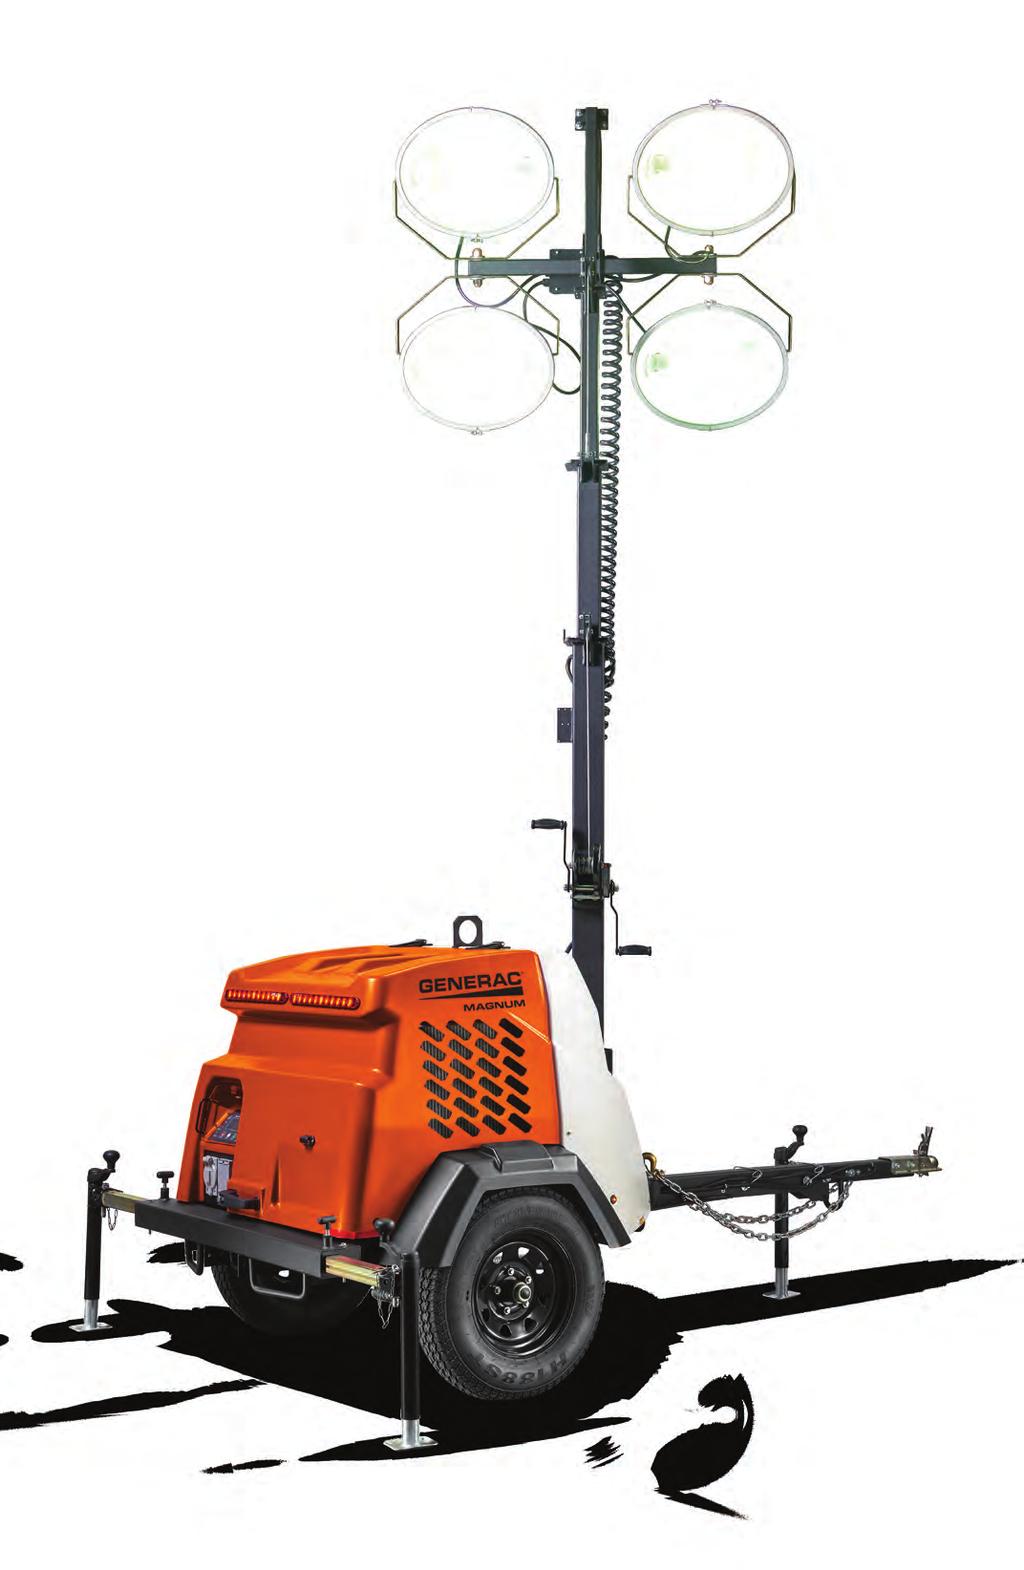 GENERAC LEDs VERTICAL MAST for quicker, easier deployment and more